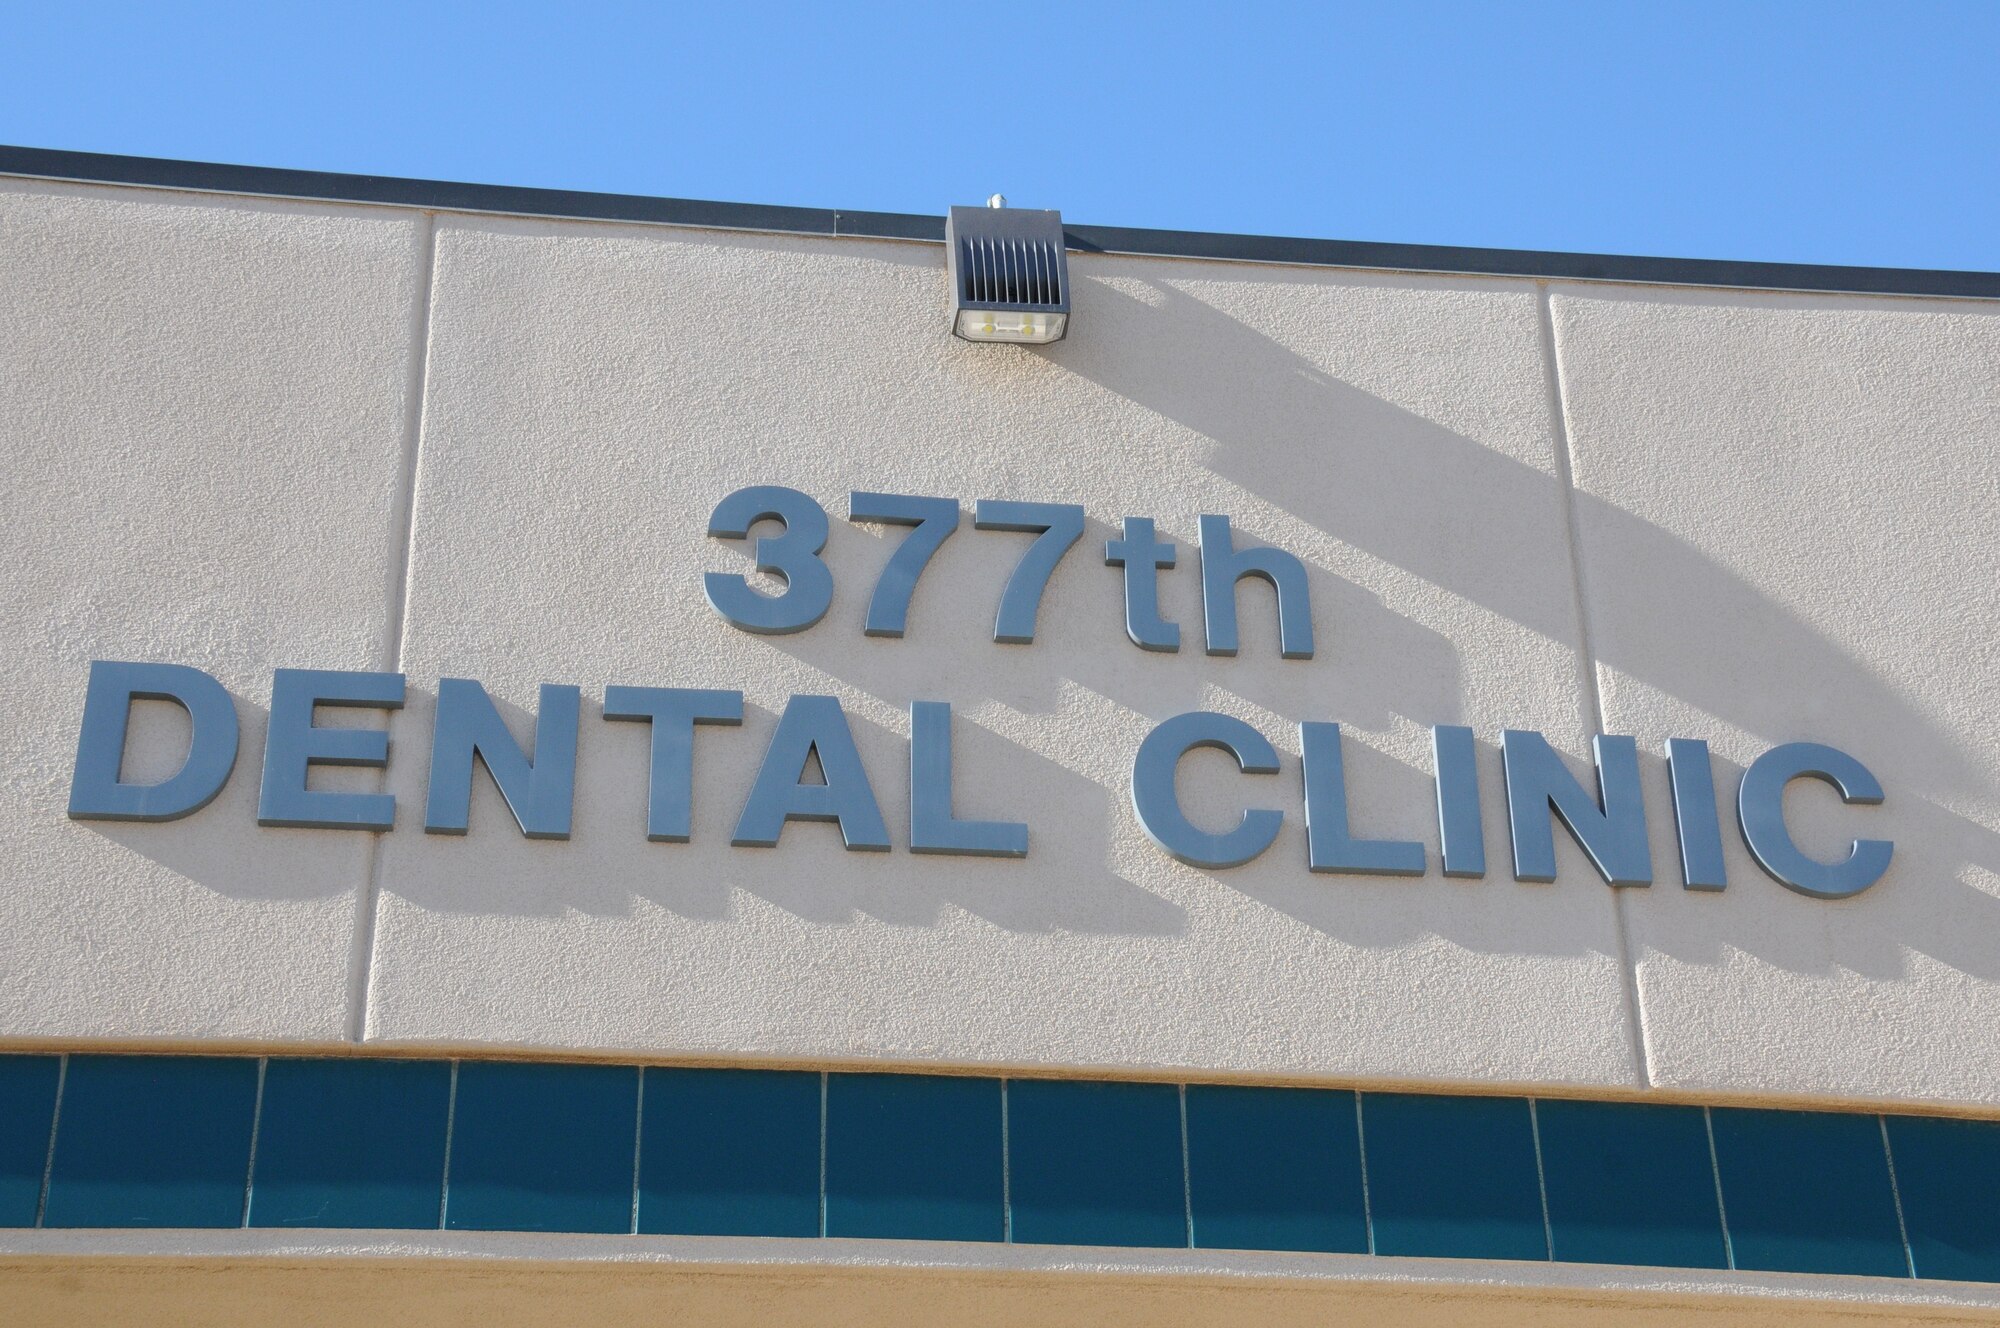 Photo of exterior dental clinic building identification.